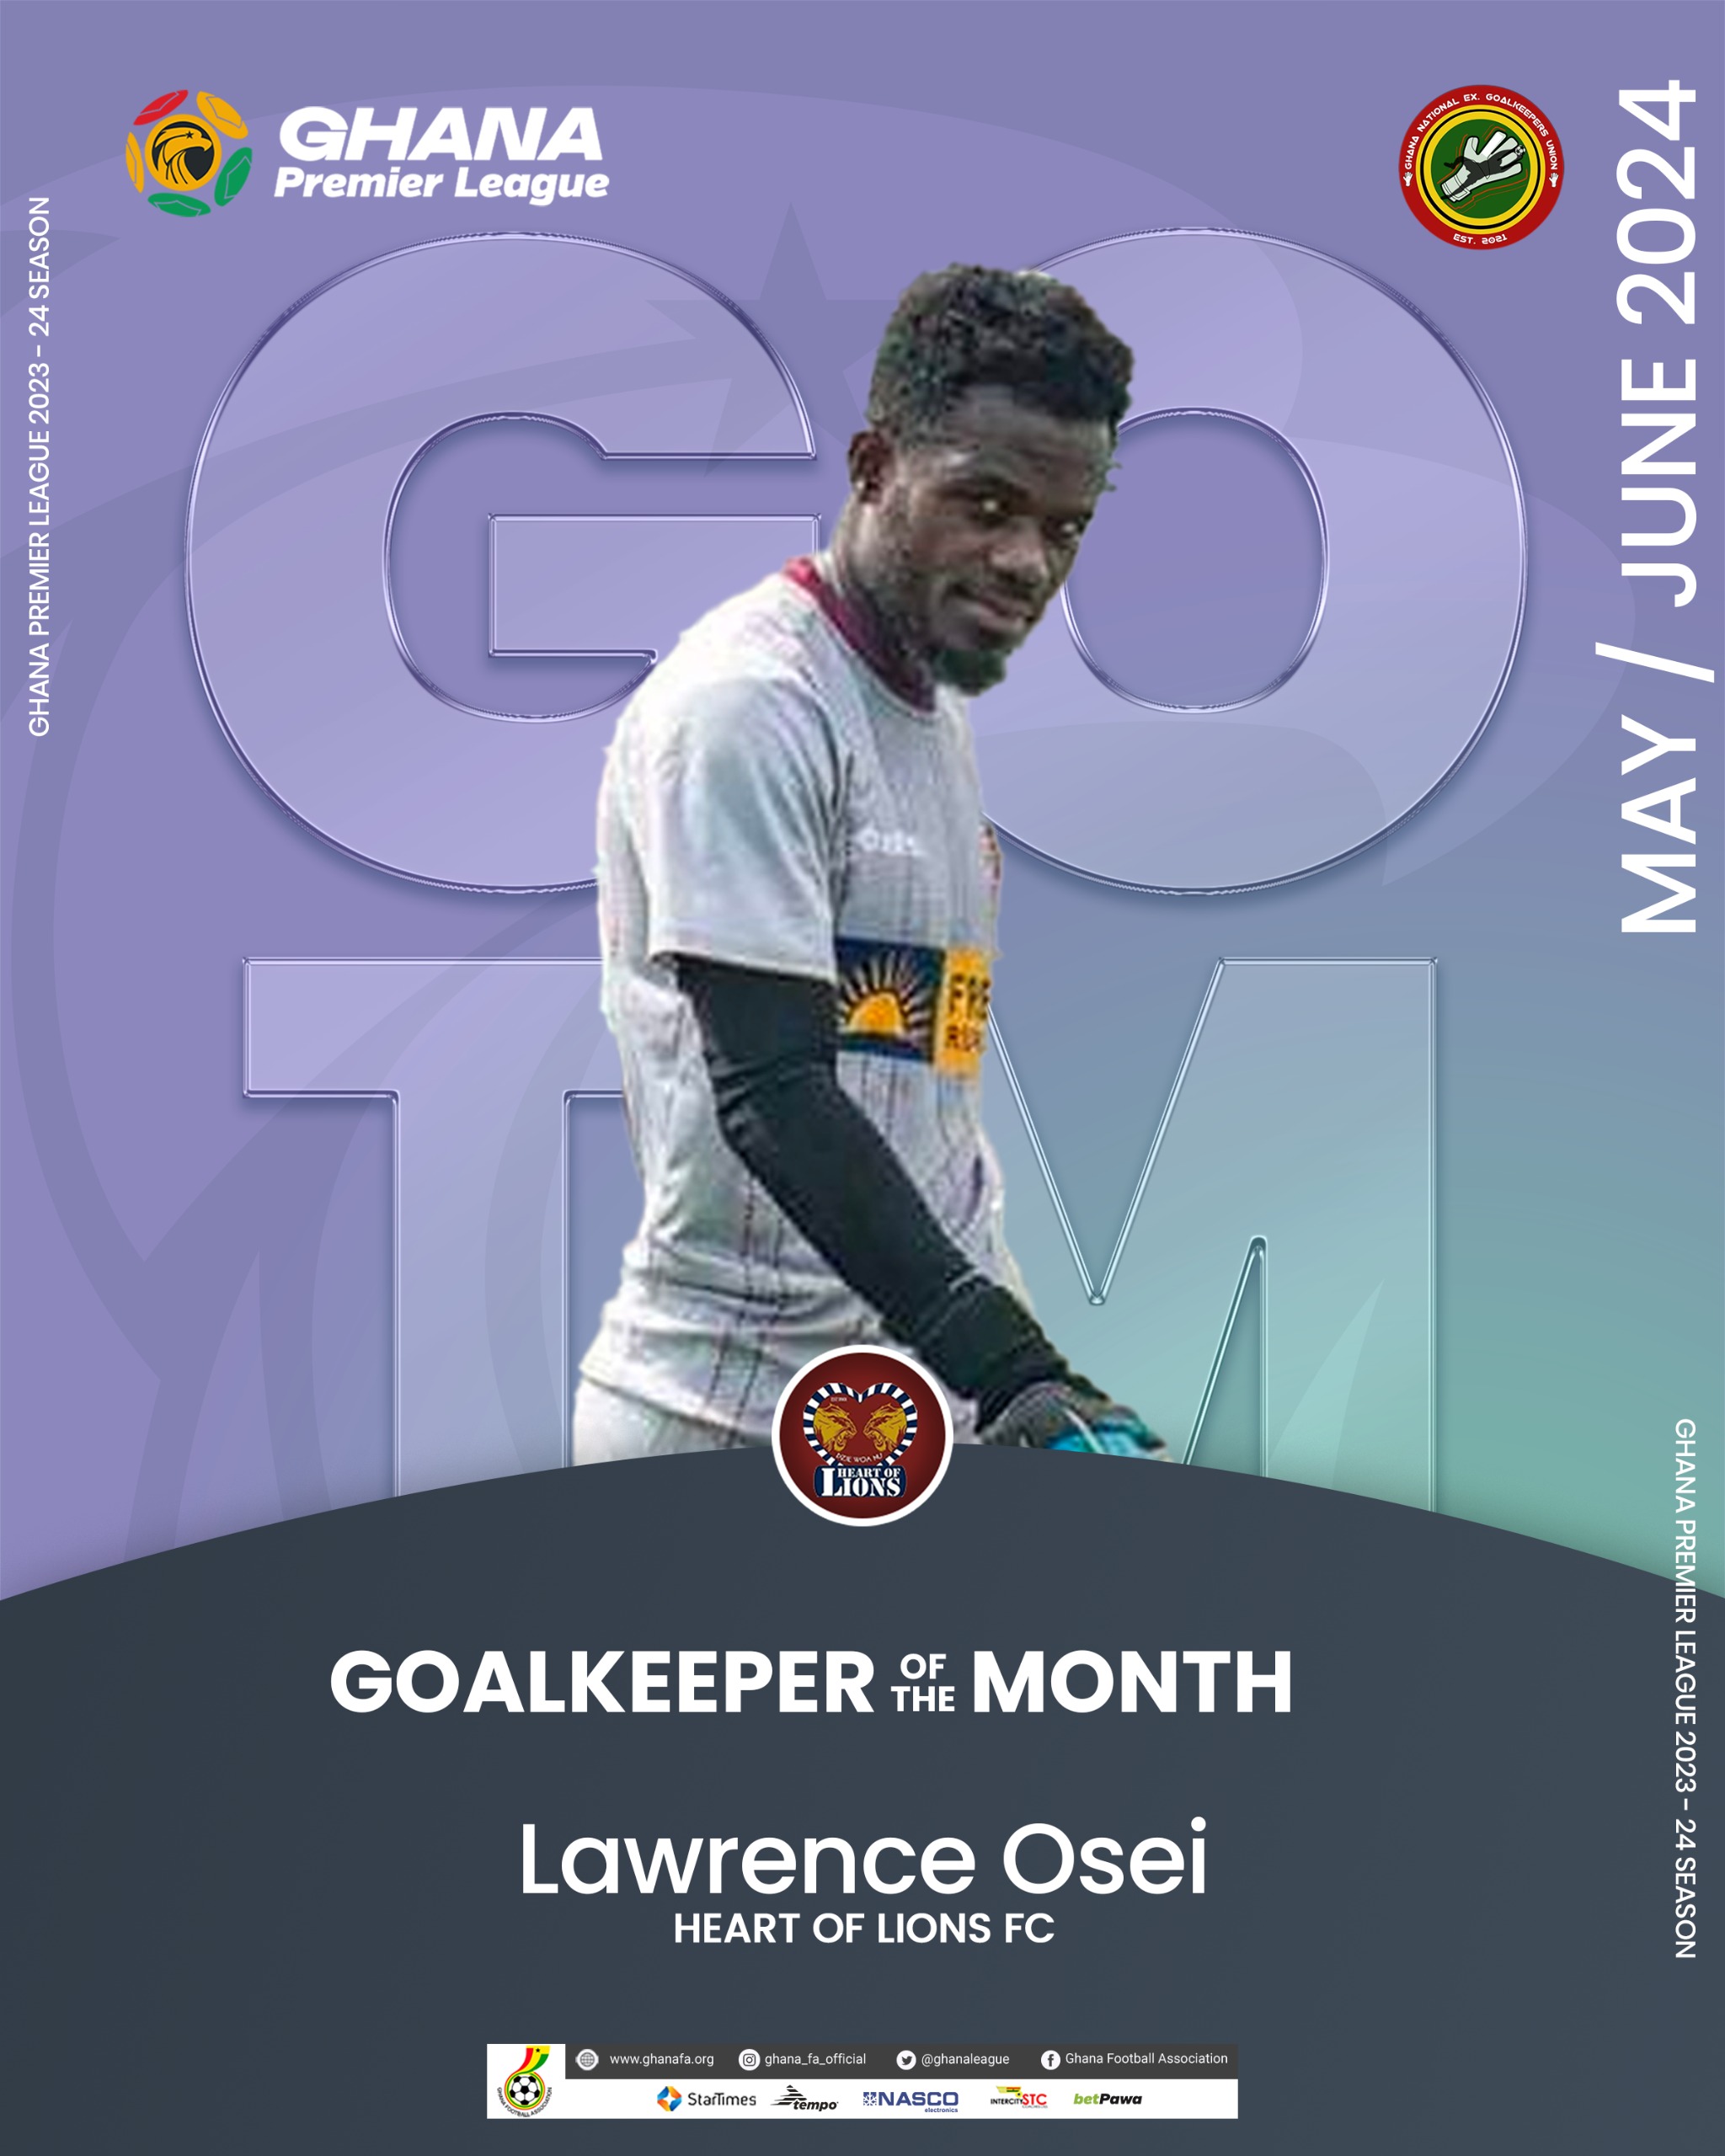 Lawrence Osei wins goalkeeper of the month for May/June